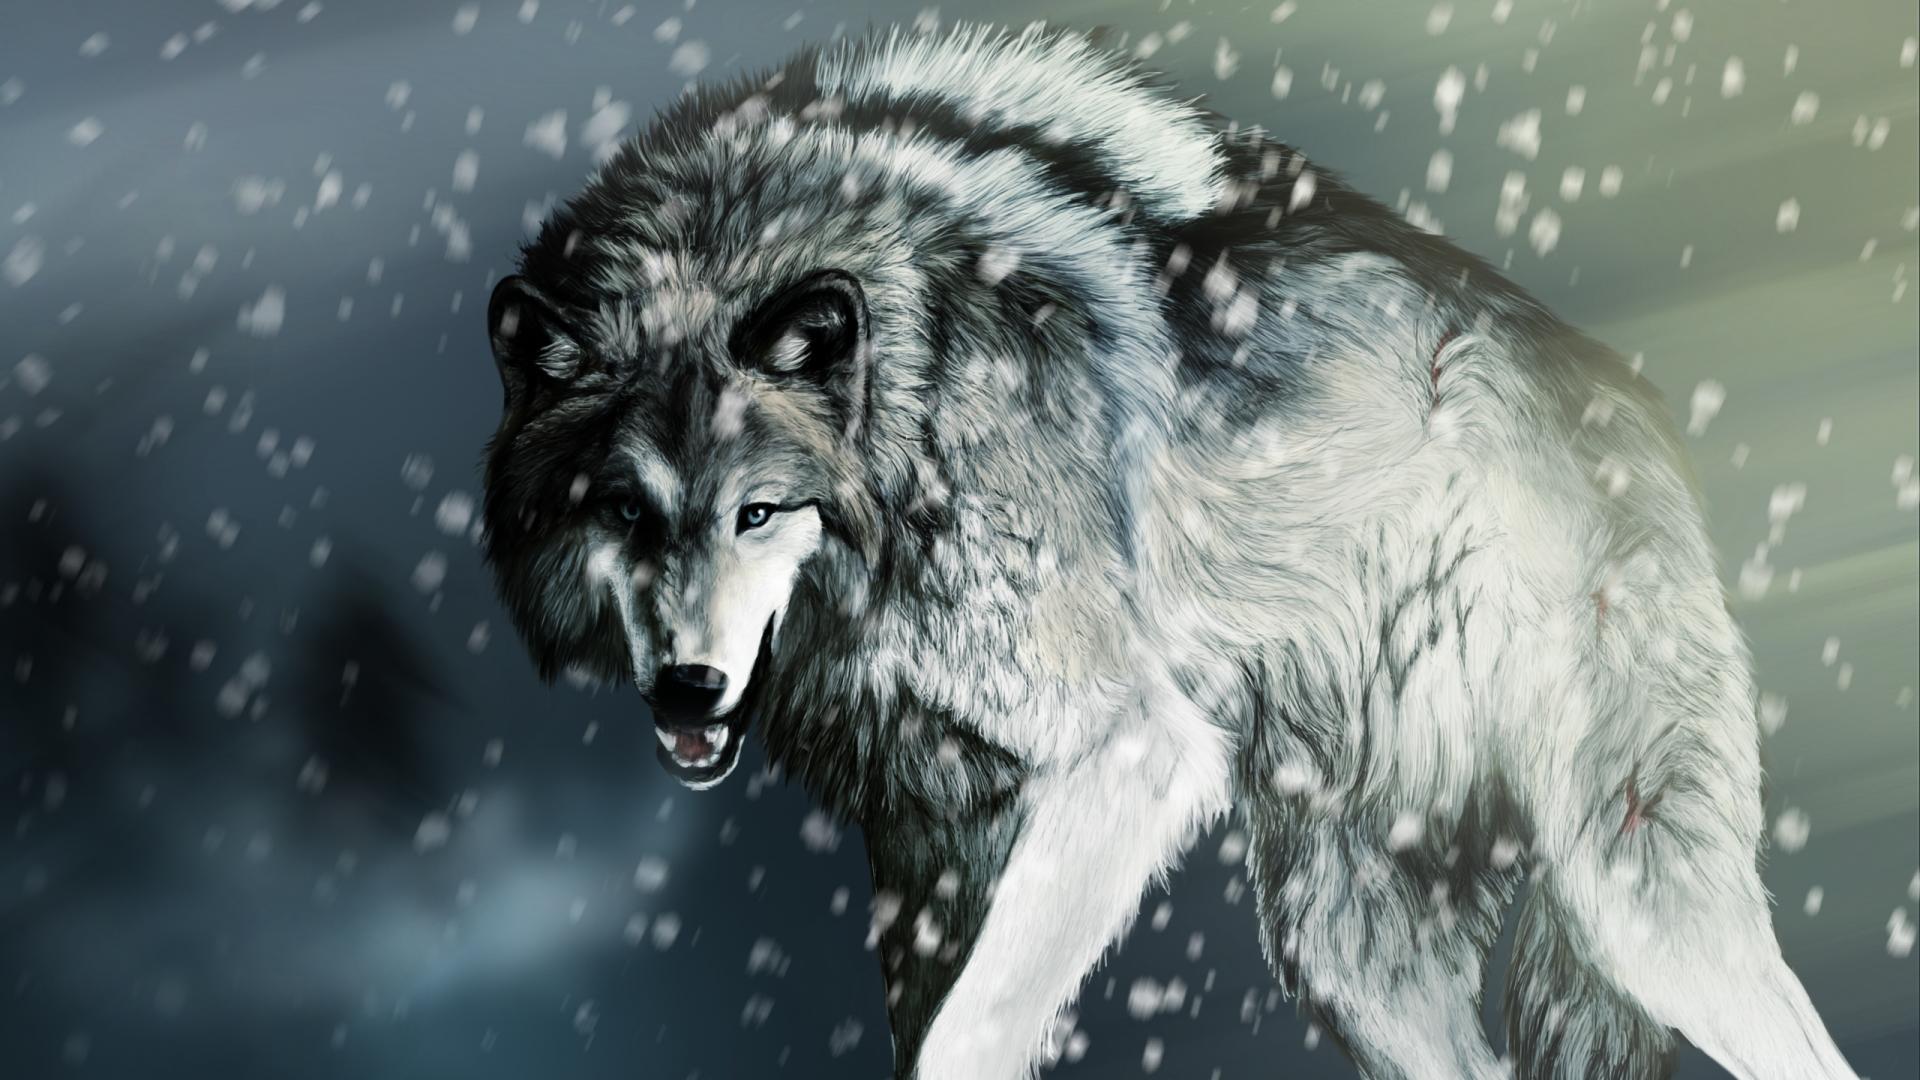 Wolf Wallpaper Black And White Image Amp Pictures Becuo